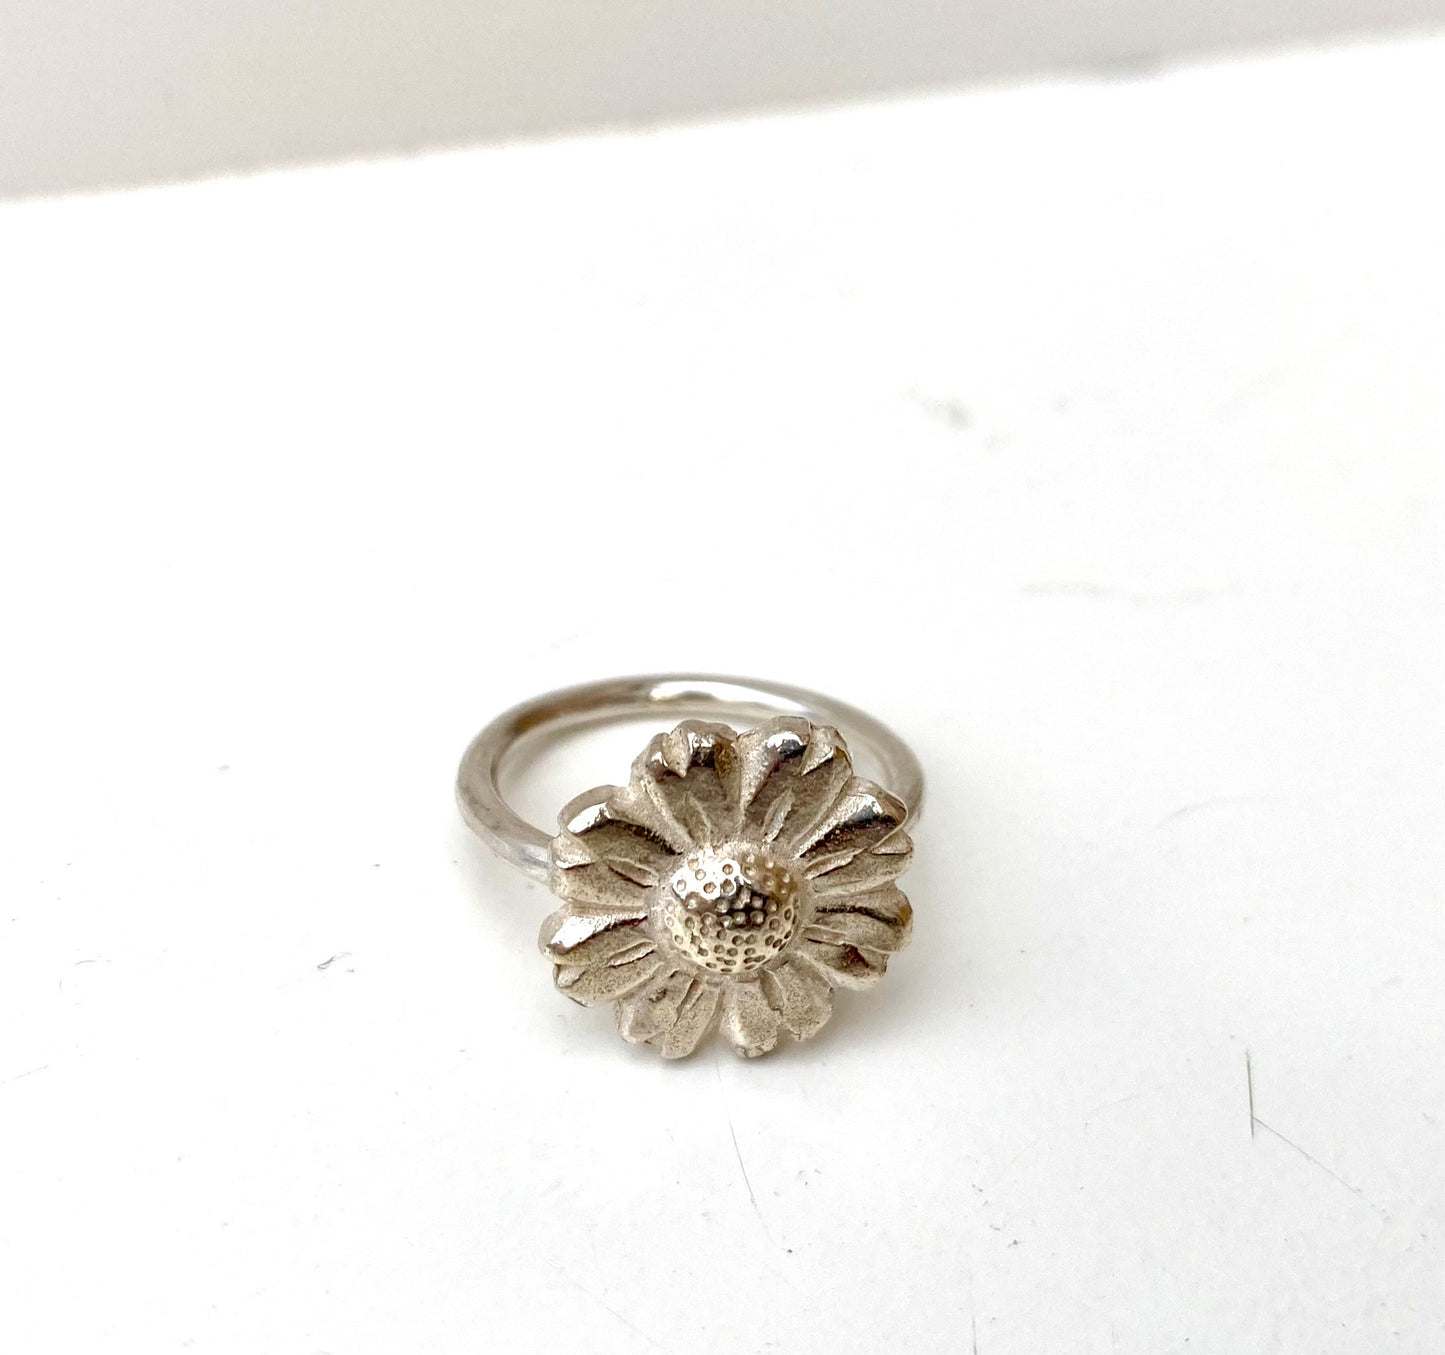 Close-up of the oxidised Daisy Flower Ring next to a brass and silver variation, highlighting the textural contrast.